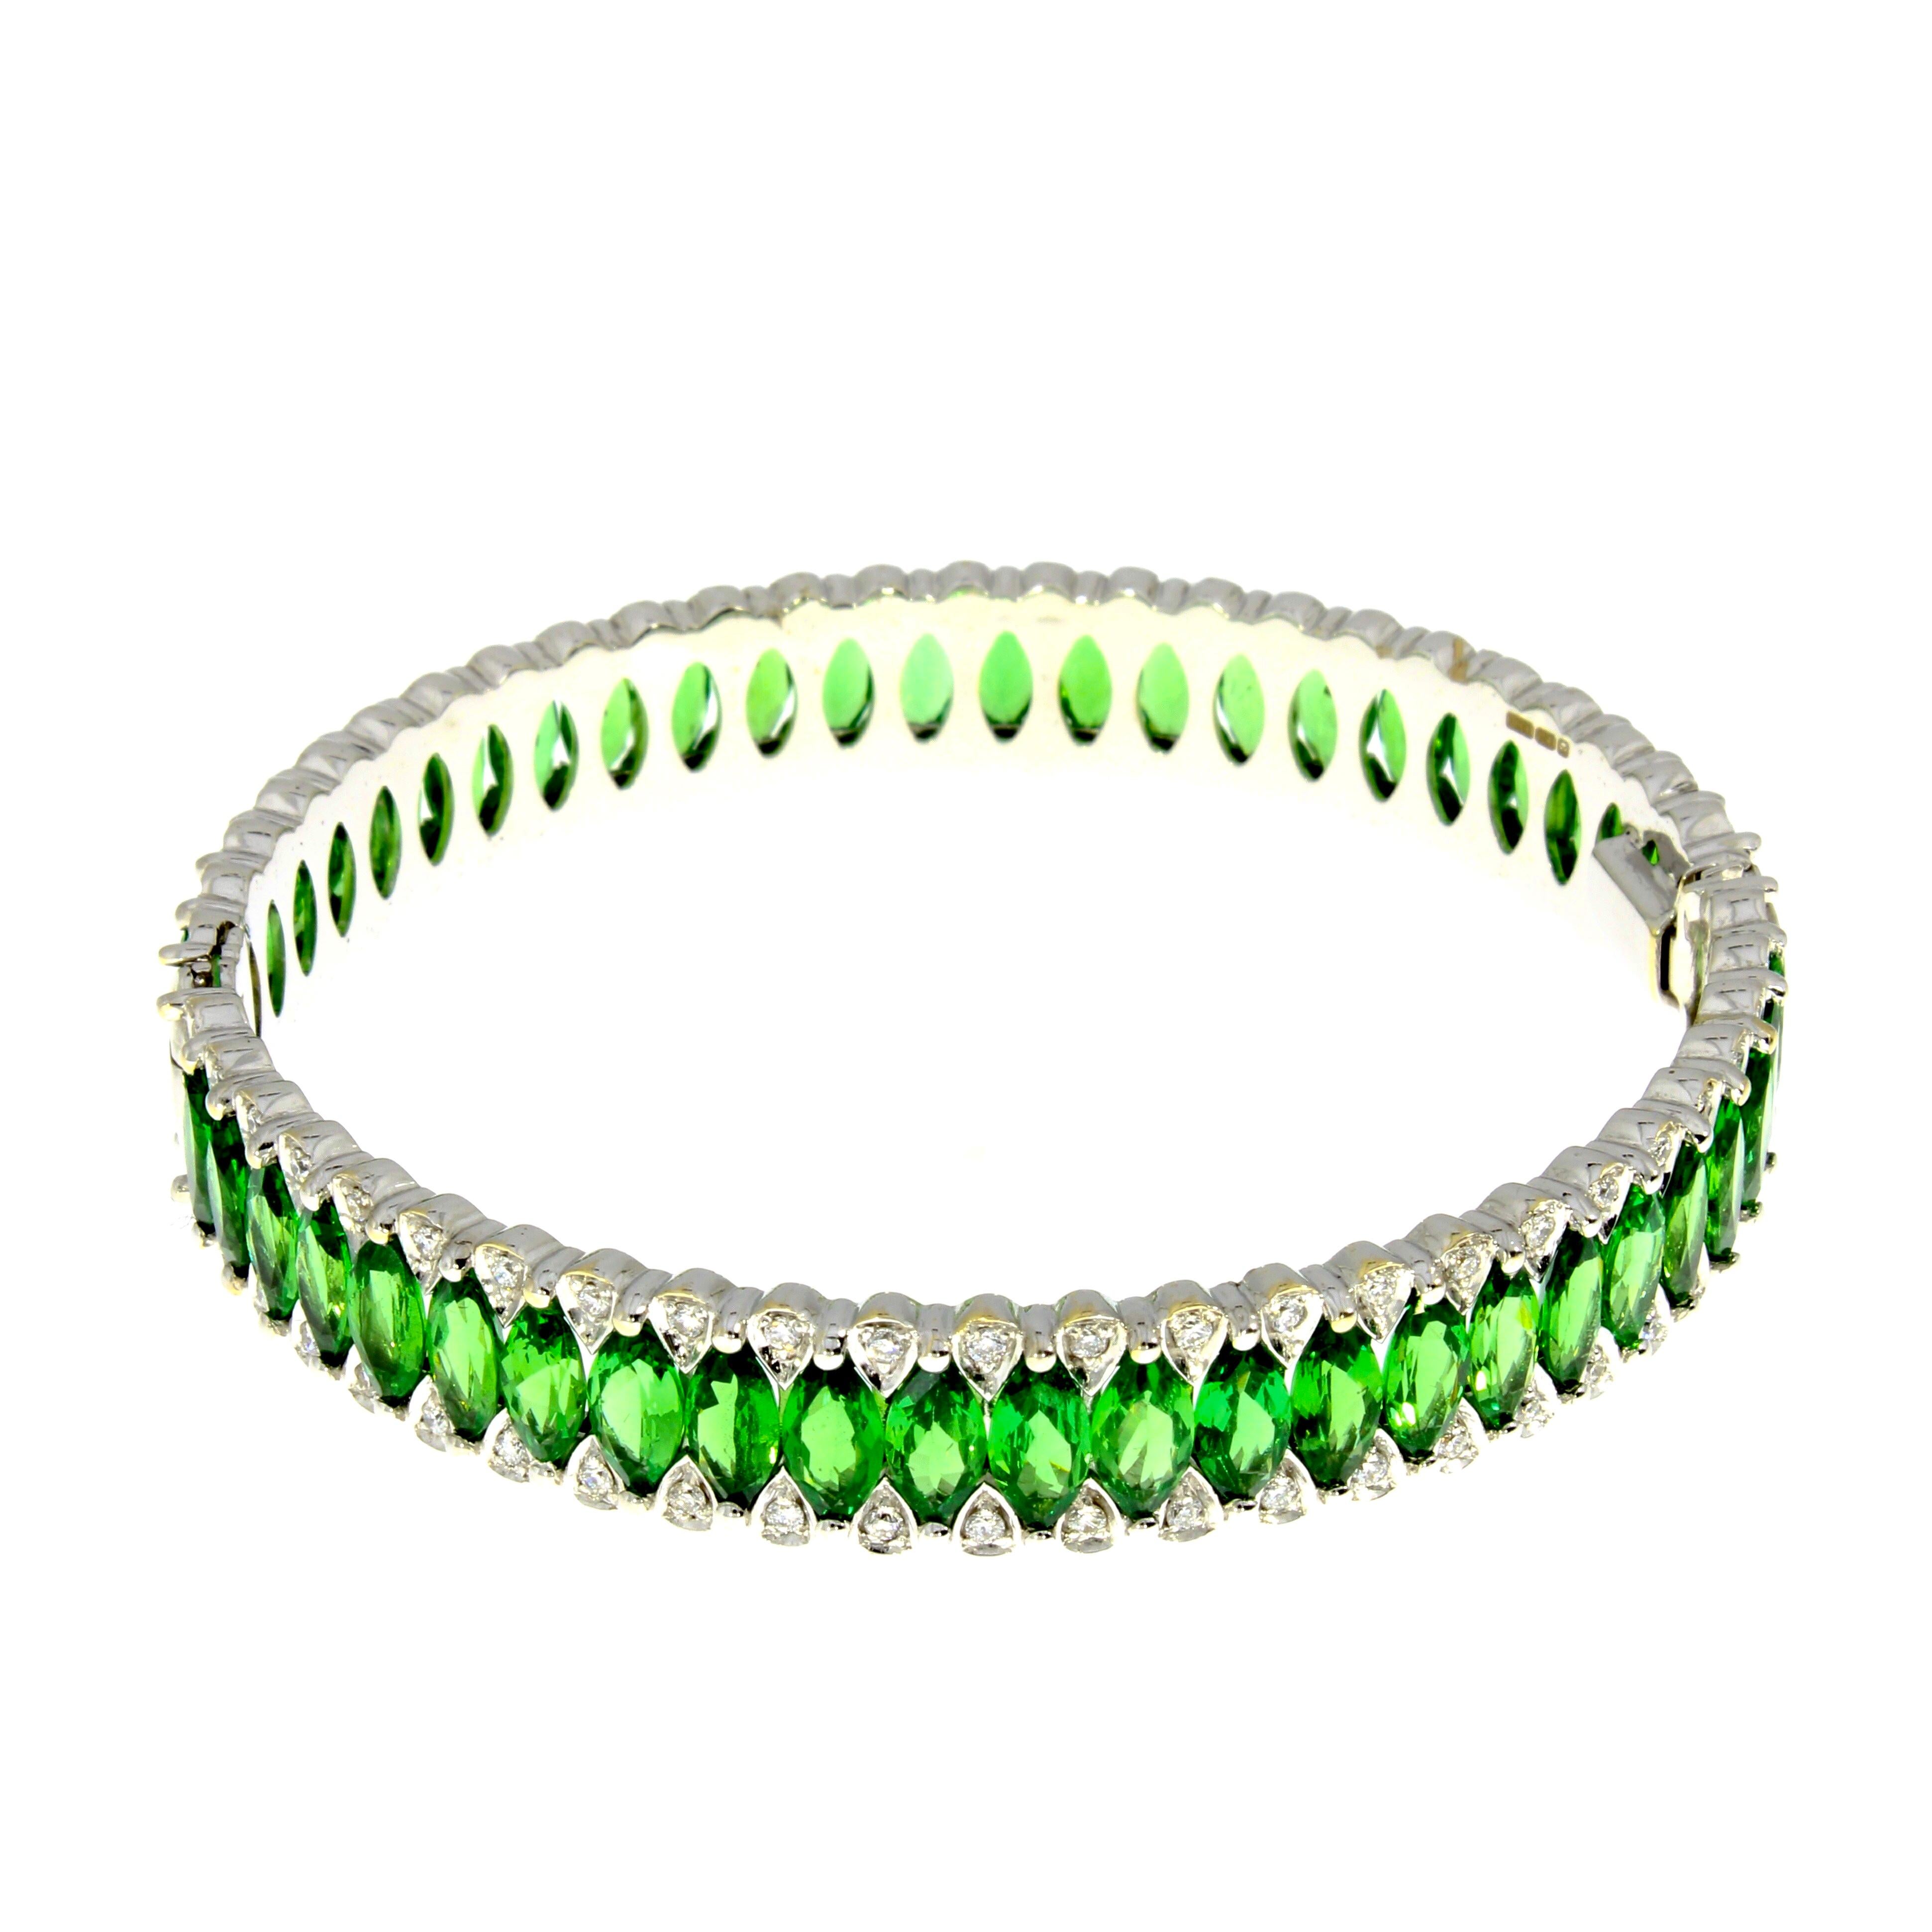 A perpetual circle of vibrant marquise cut tsavorites poised between two delicate rows of brilliant cut diamonds fluidly wraps around the wrist.

Details
- 18 karat White Gold
- 29.89 Carat Tsavorite
- 1.02 Carat Diamond

Diameter 2.3 inches